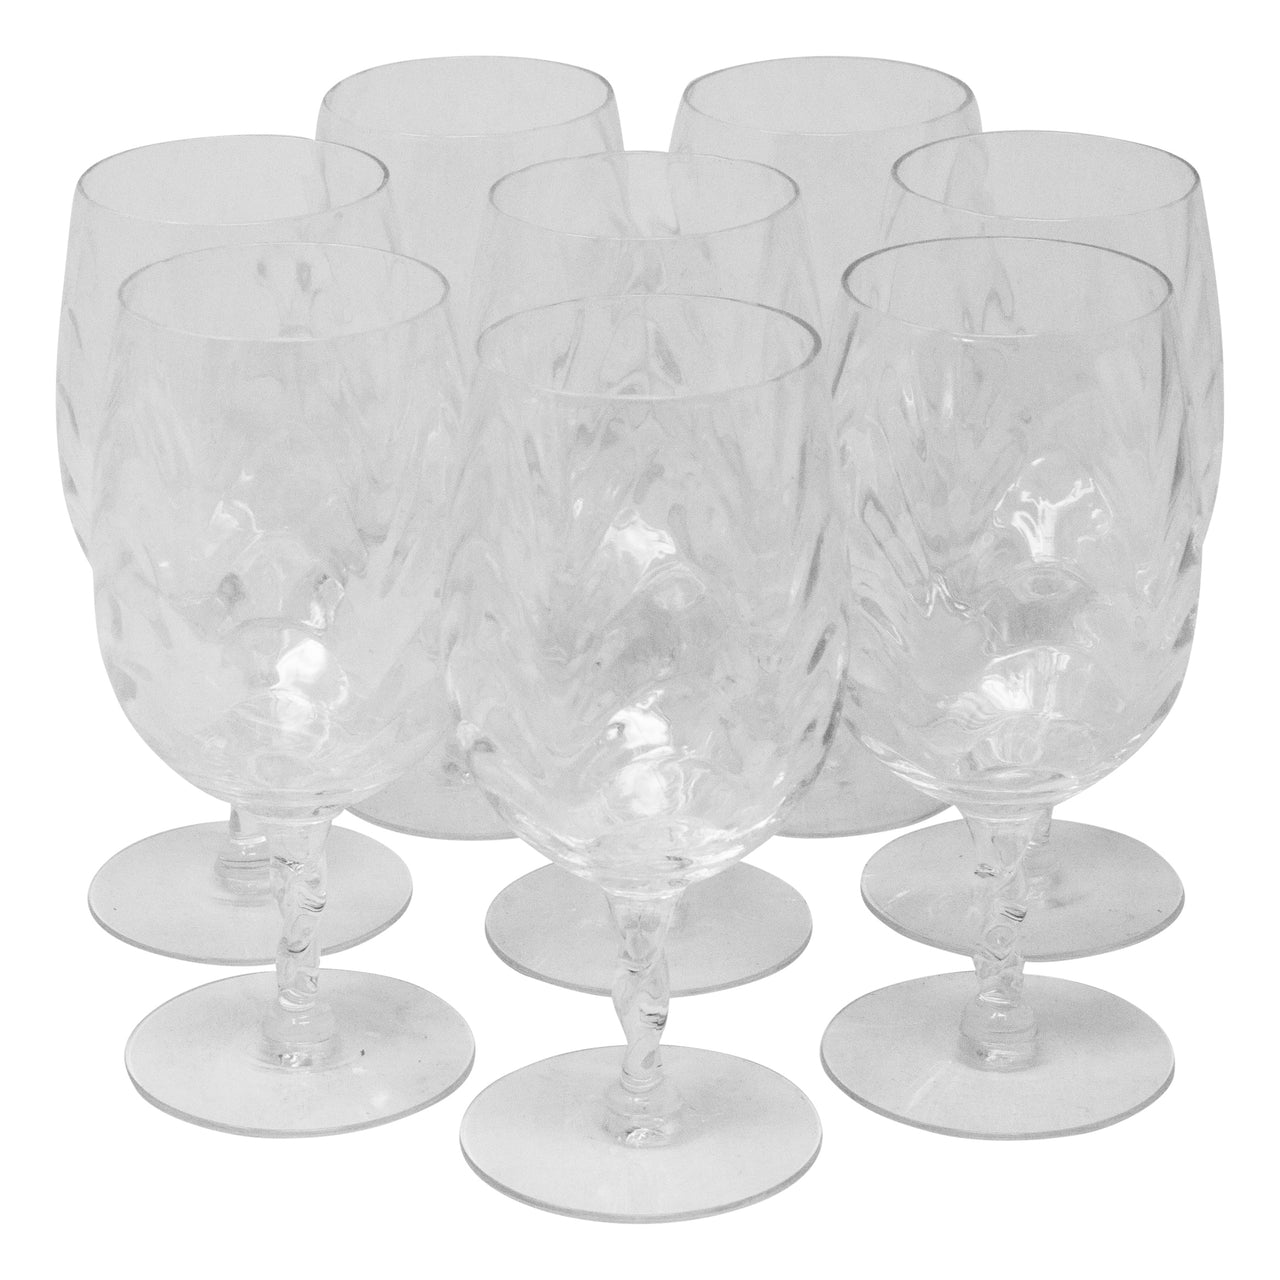 Vintage Draping Twisted Stem Wine Glasses | The Hour Shop